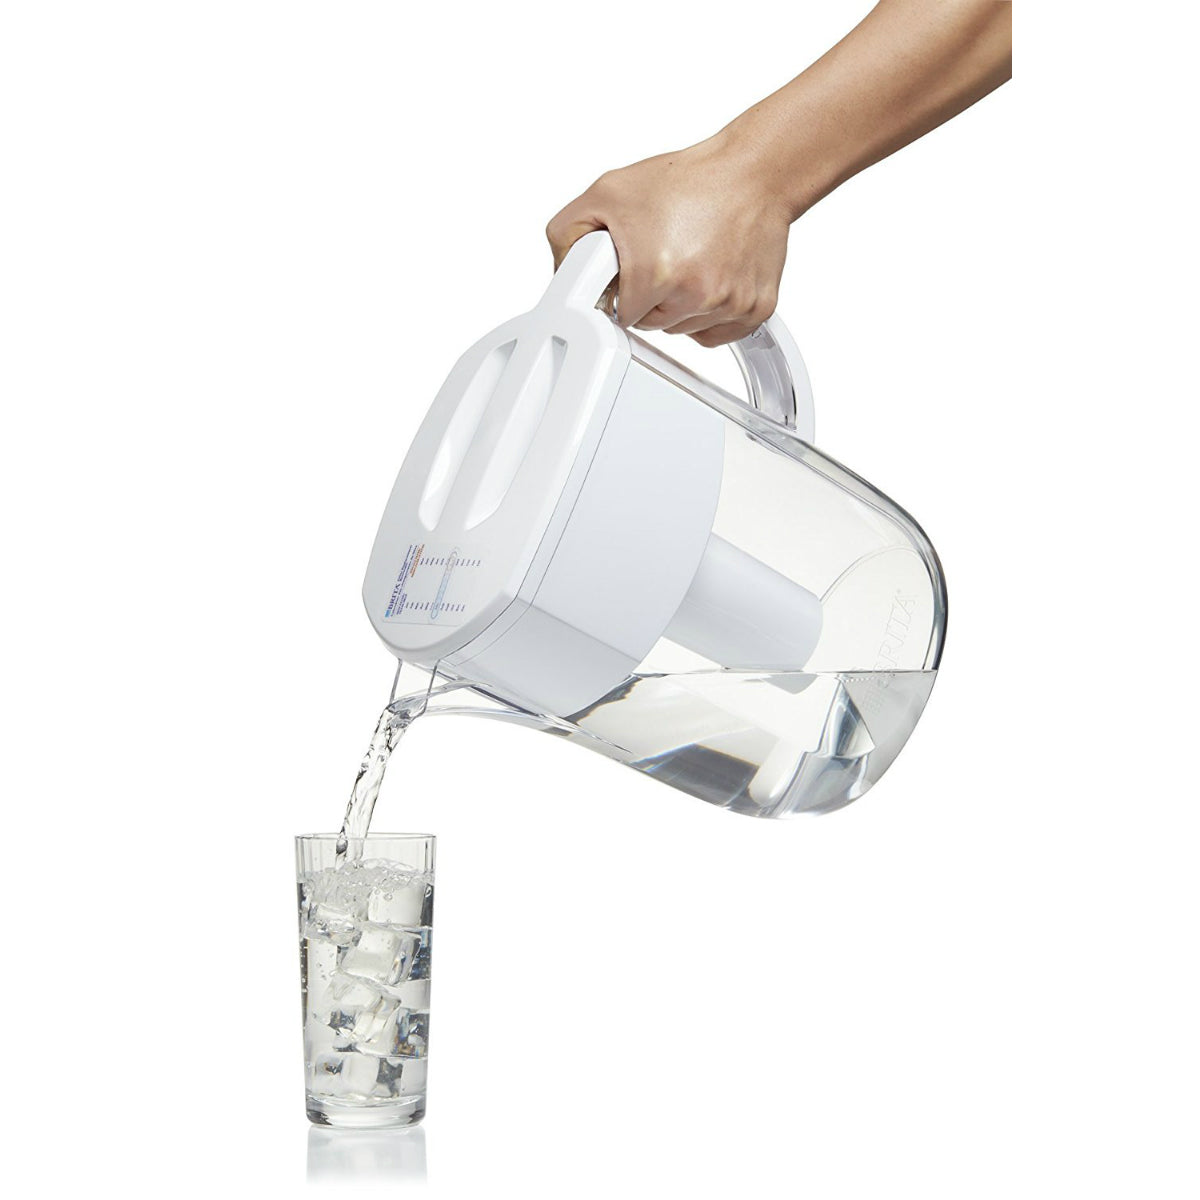 Brita 35509 Everyday Water Filter Pitcher, Clear/White, 10-Cup Capacity